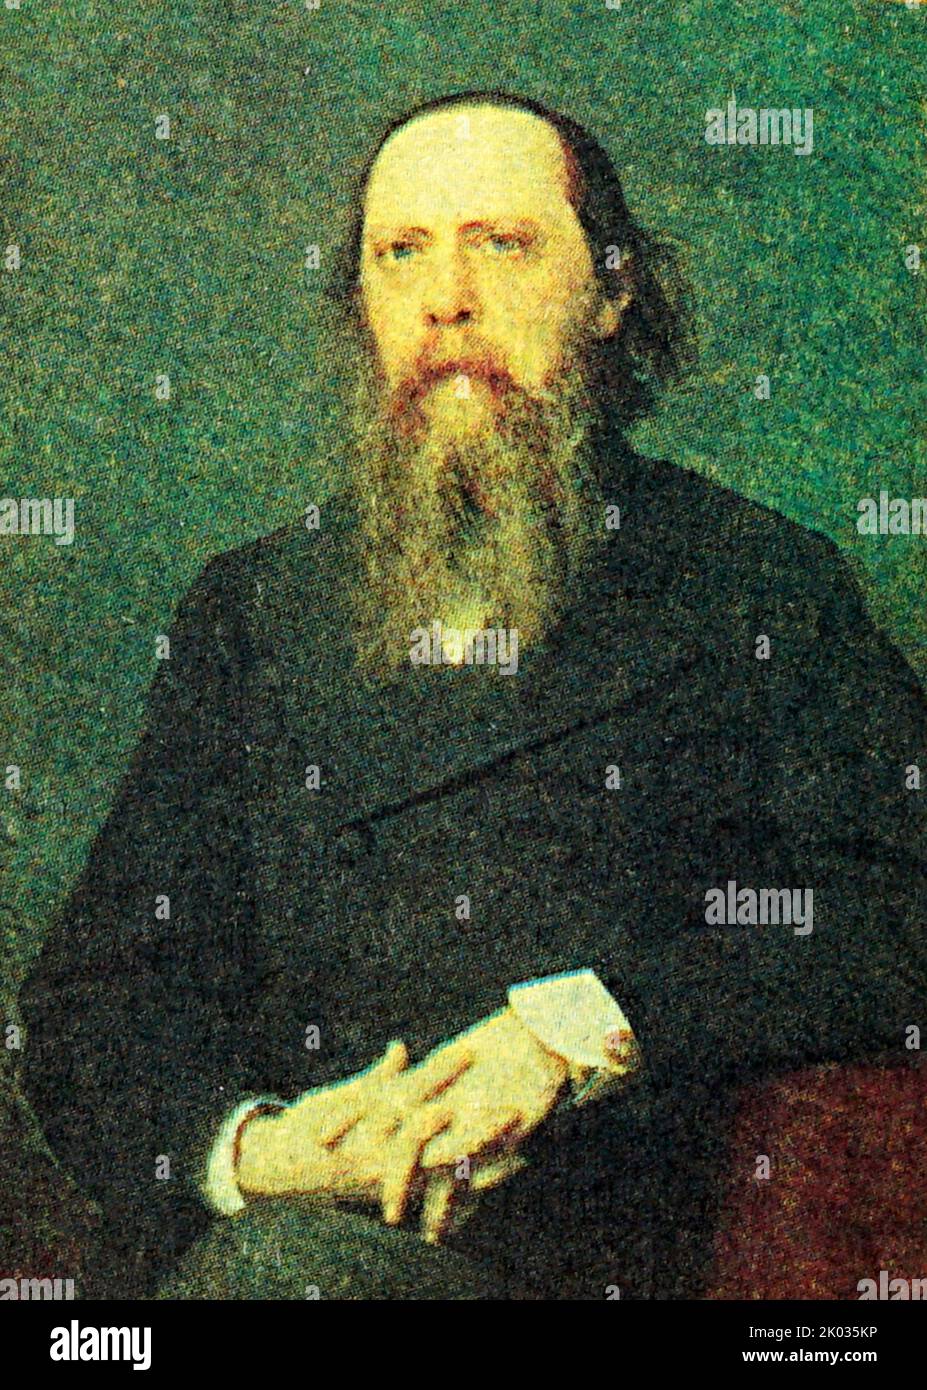 Mikhail Yevgrafovich Saltykov-Shchedrin (1826 - 1889), Russian writer and satirist of the 19th century. Stock Photo